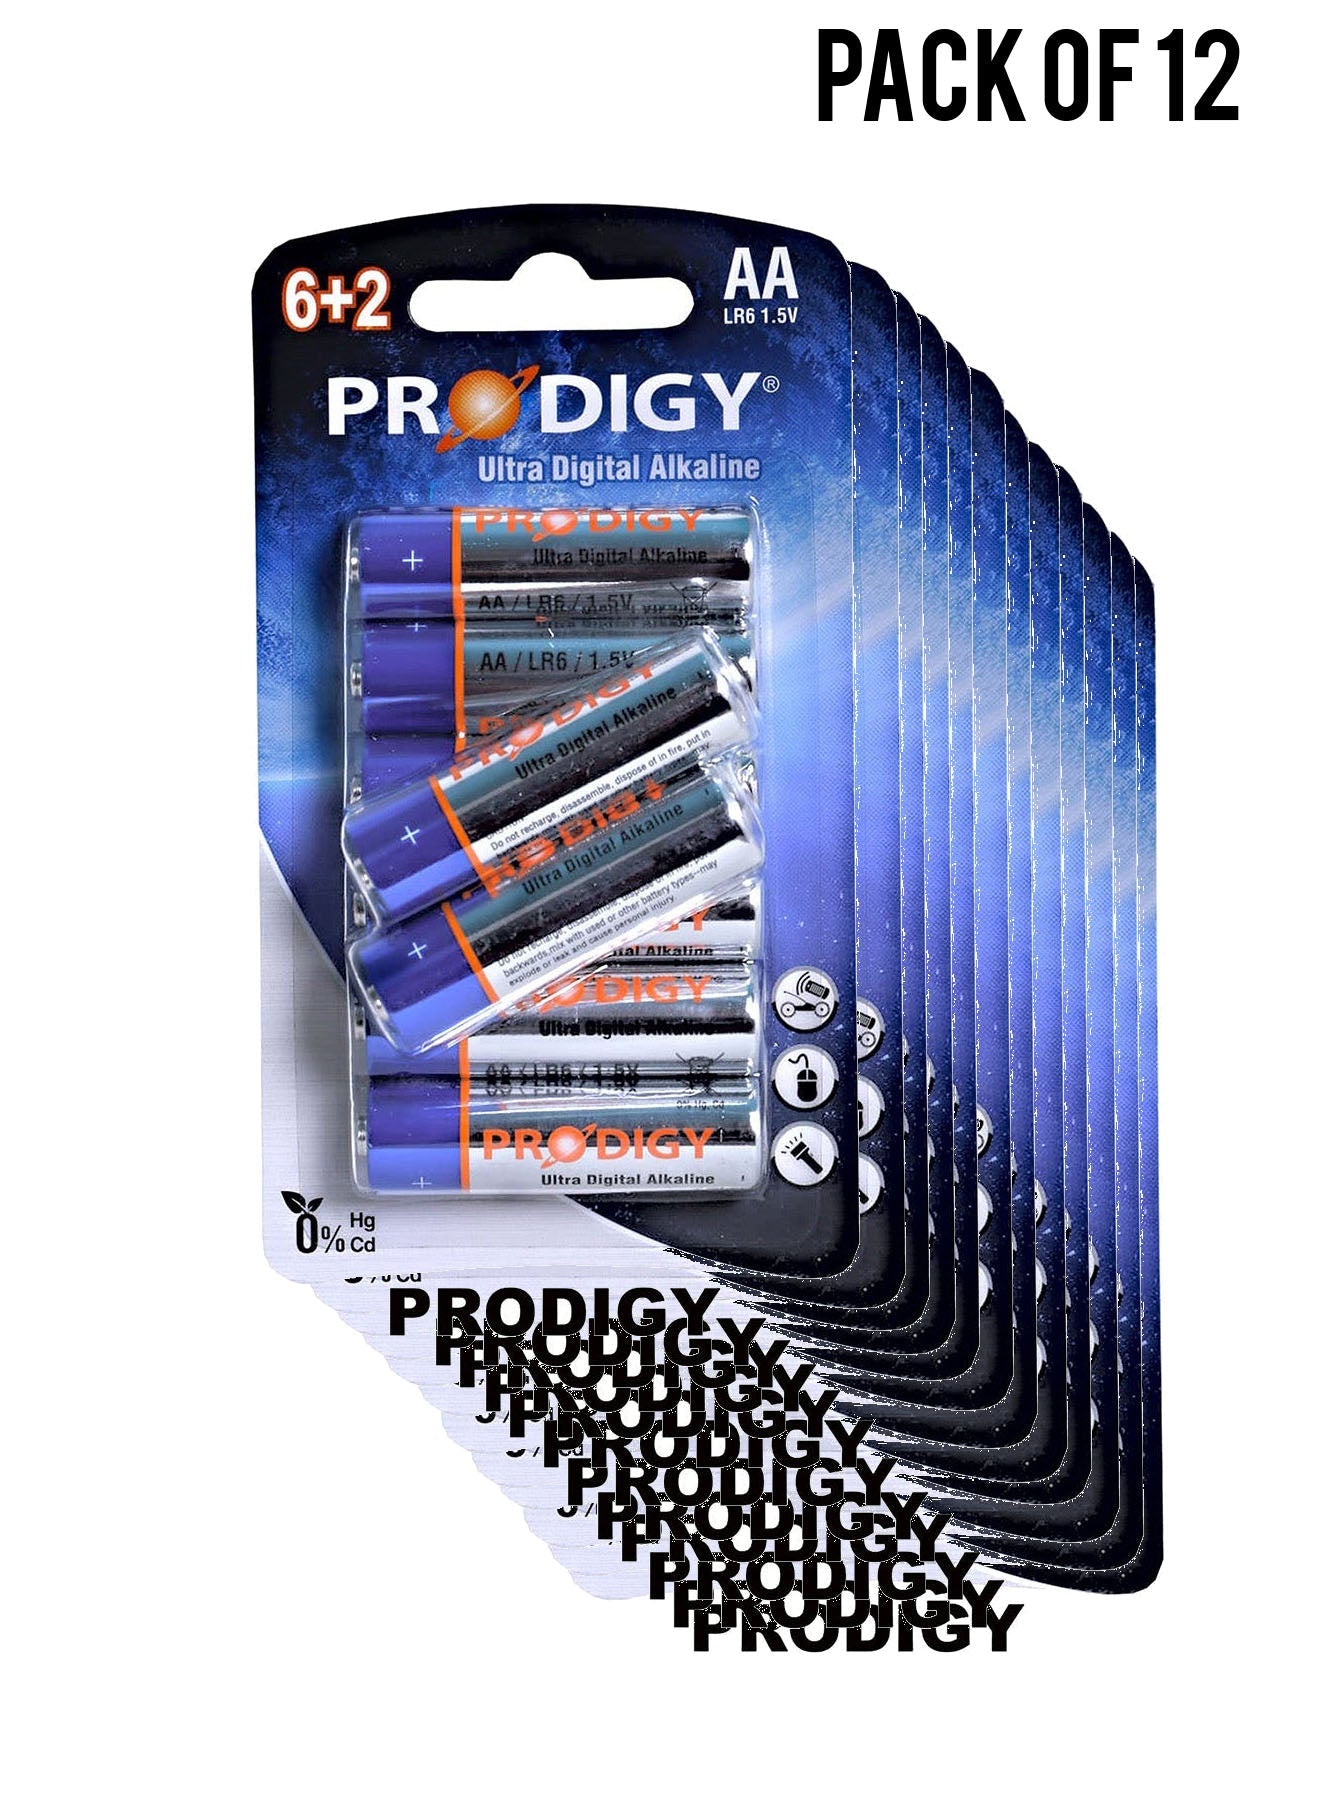 Prodigy Alkaline LR6UD 62B AA8 Value Pack of 12 